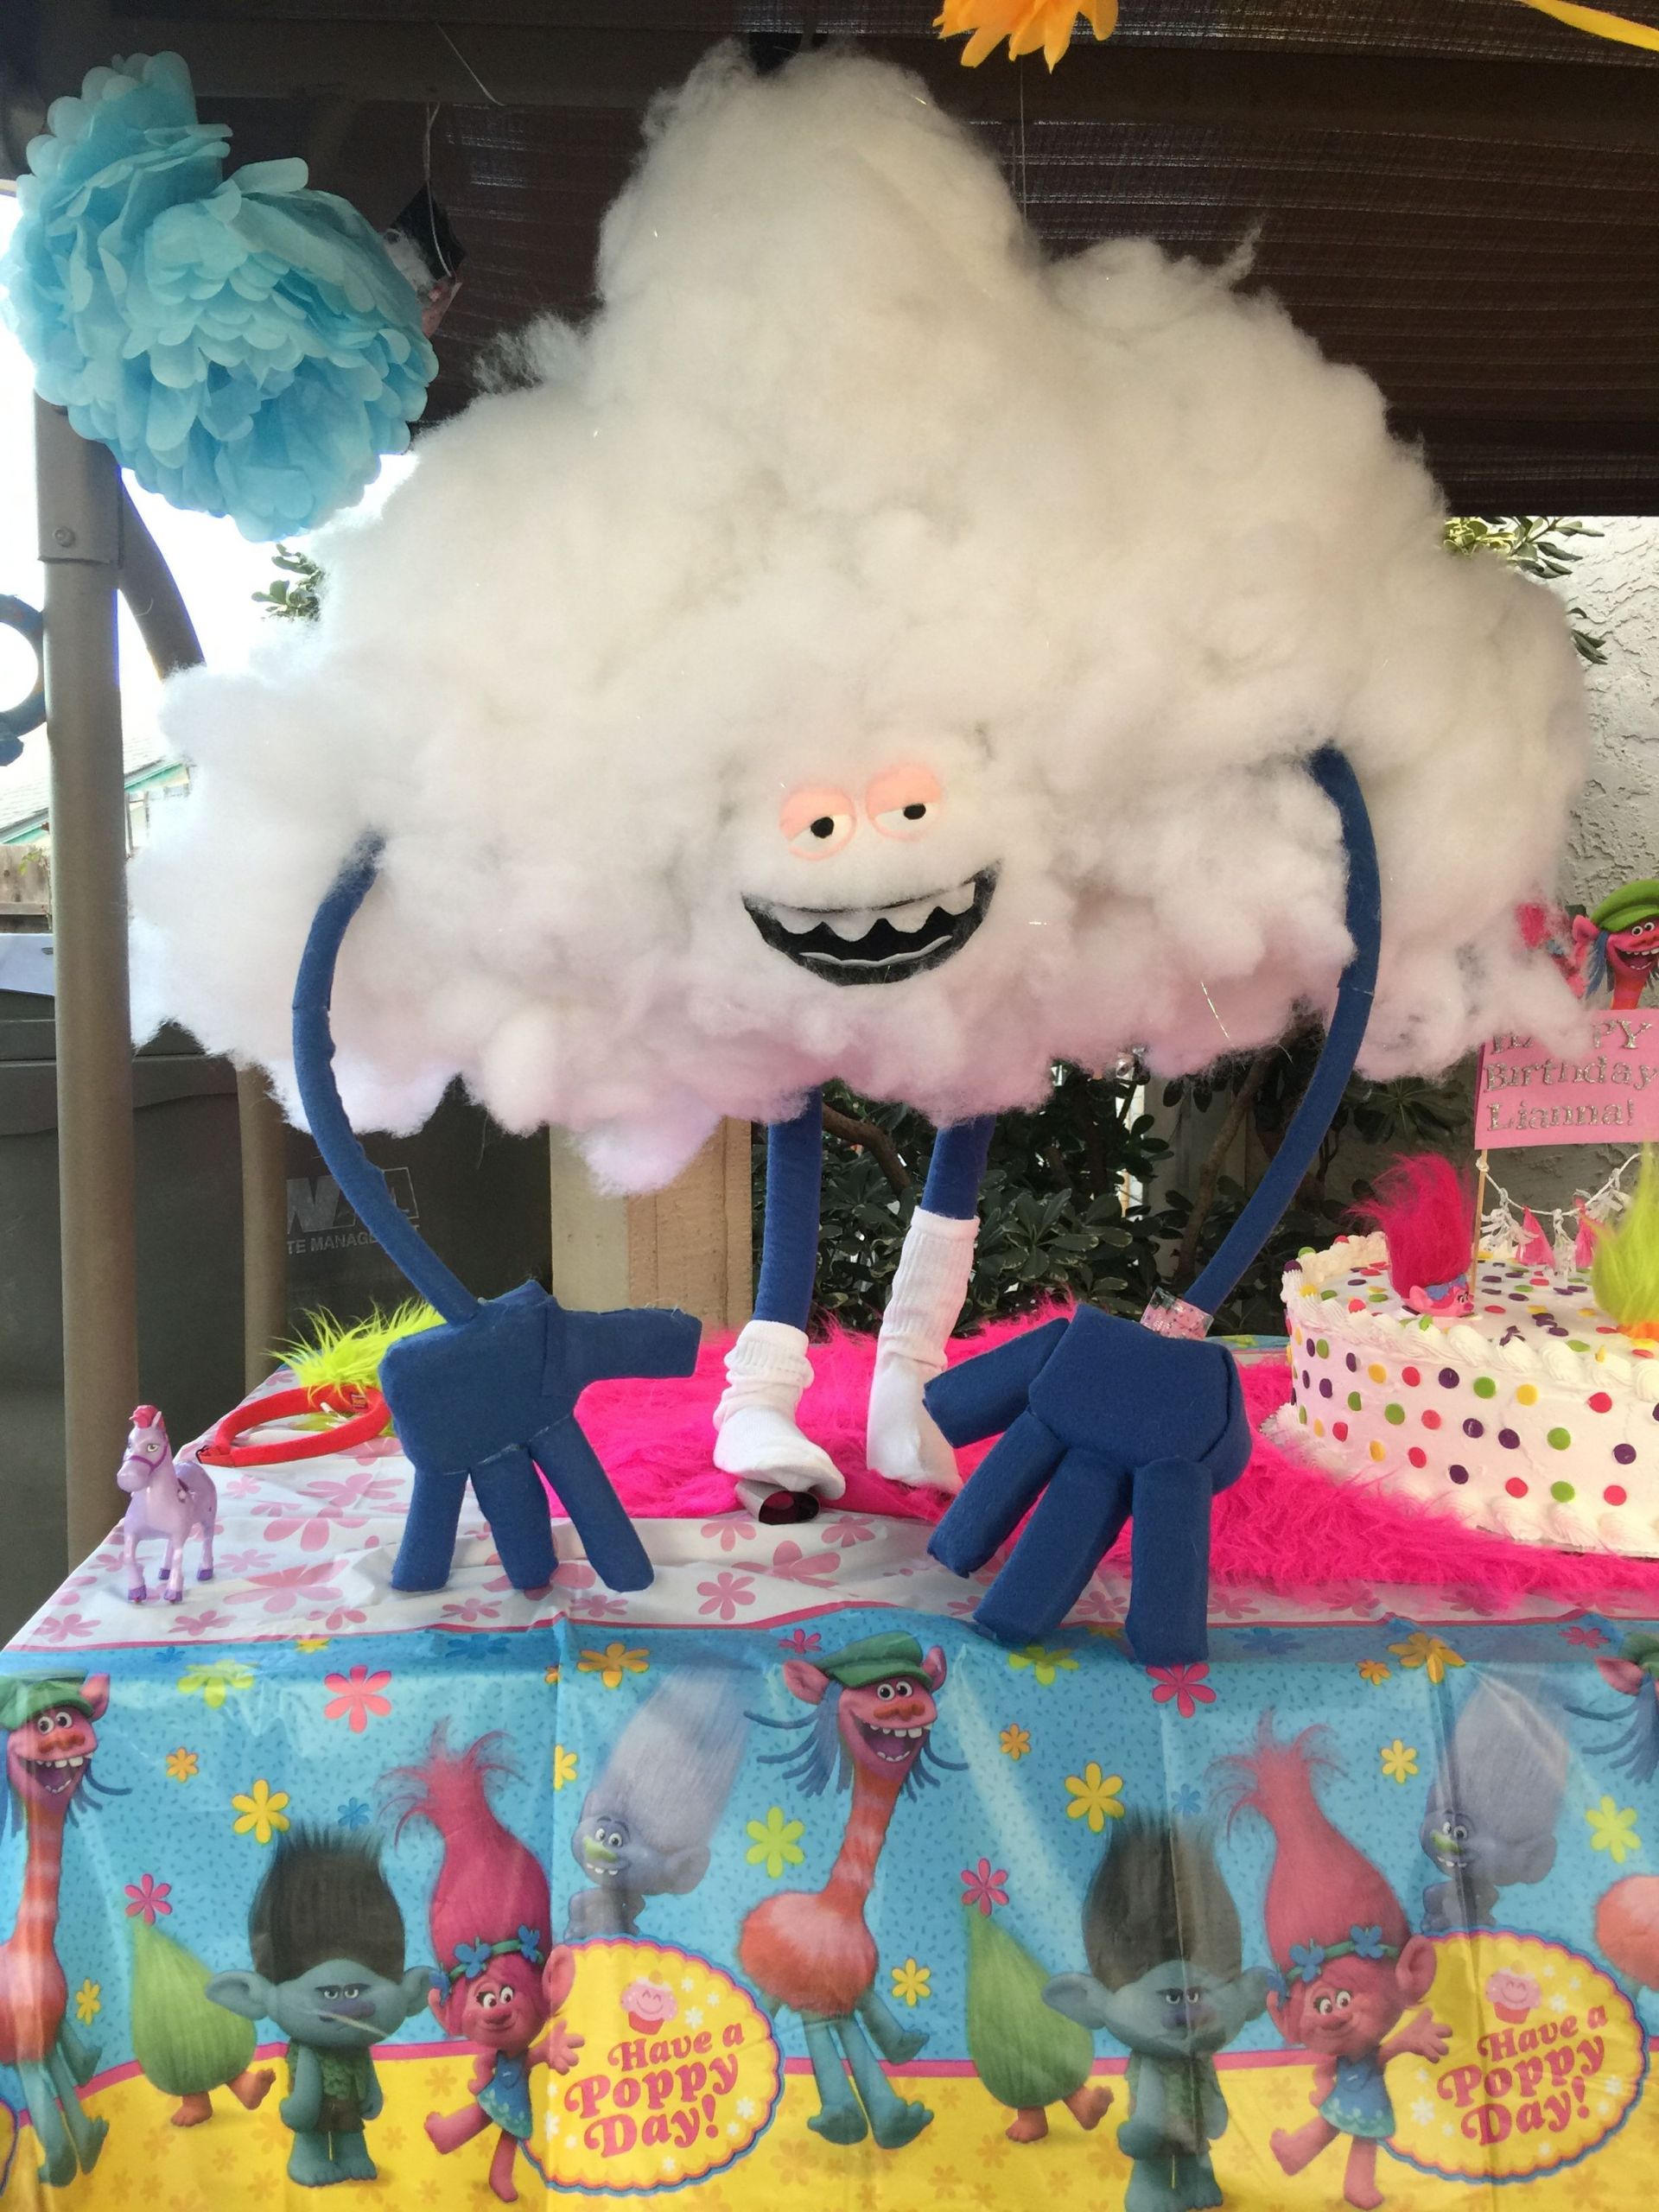 Trolls Party Ideas For Girl
 Cloud party prop we made for a Trolls themed birthday